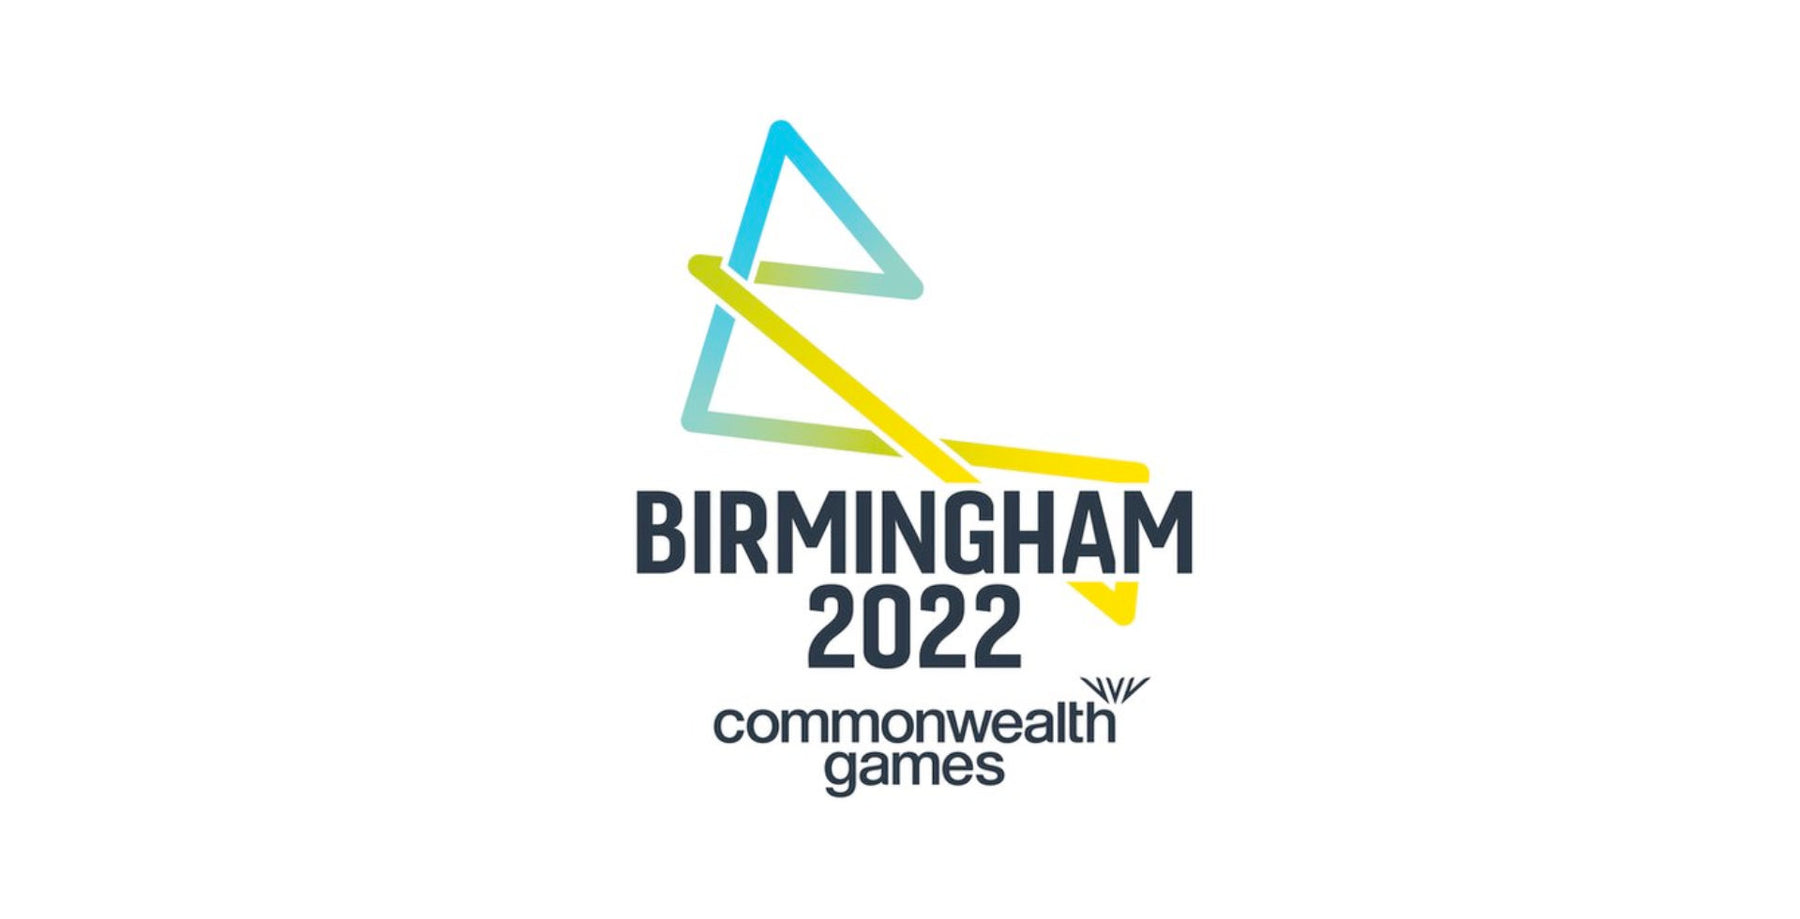 Commonwealth Games Coming to Birmingham